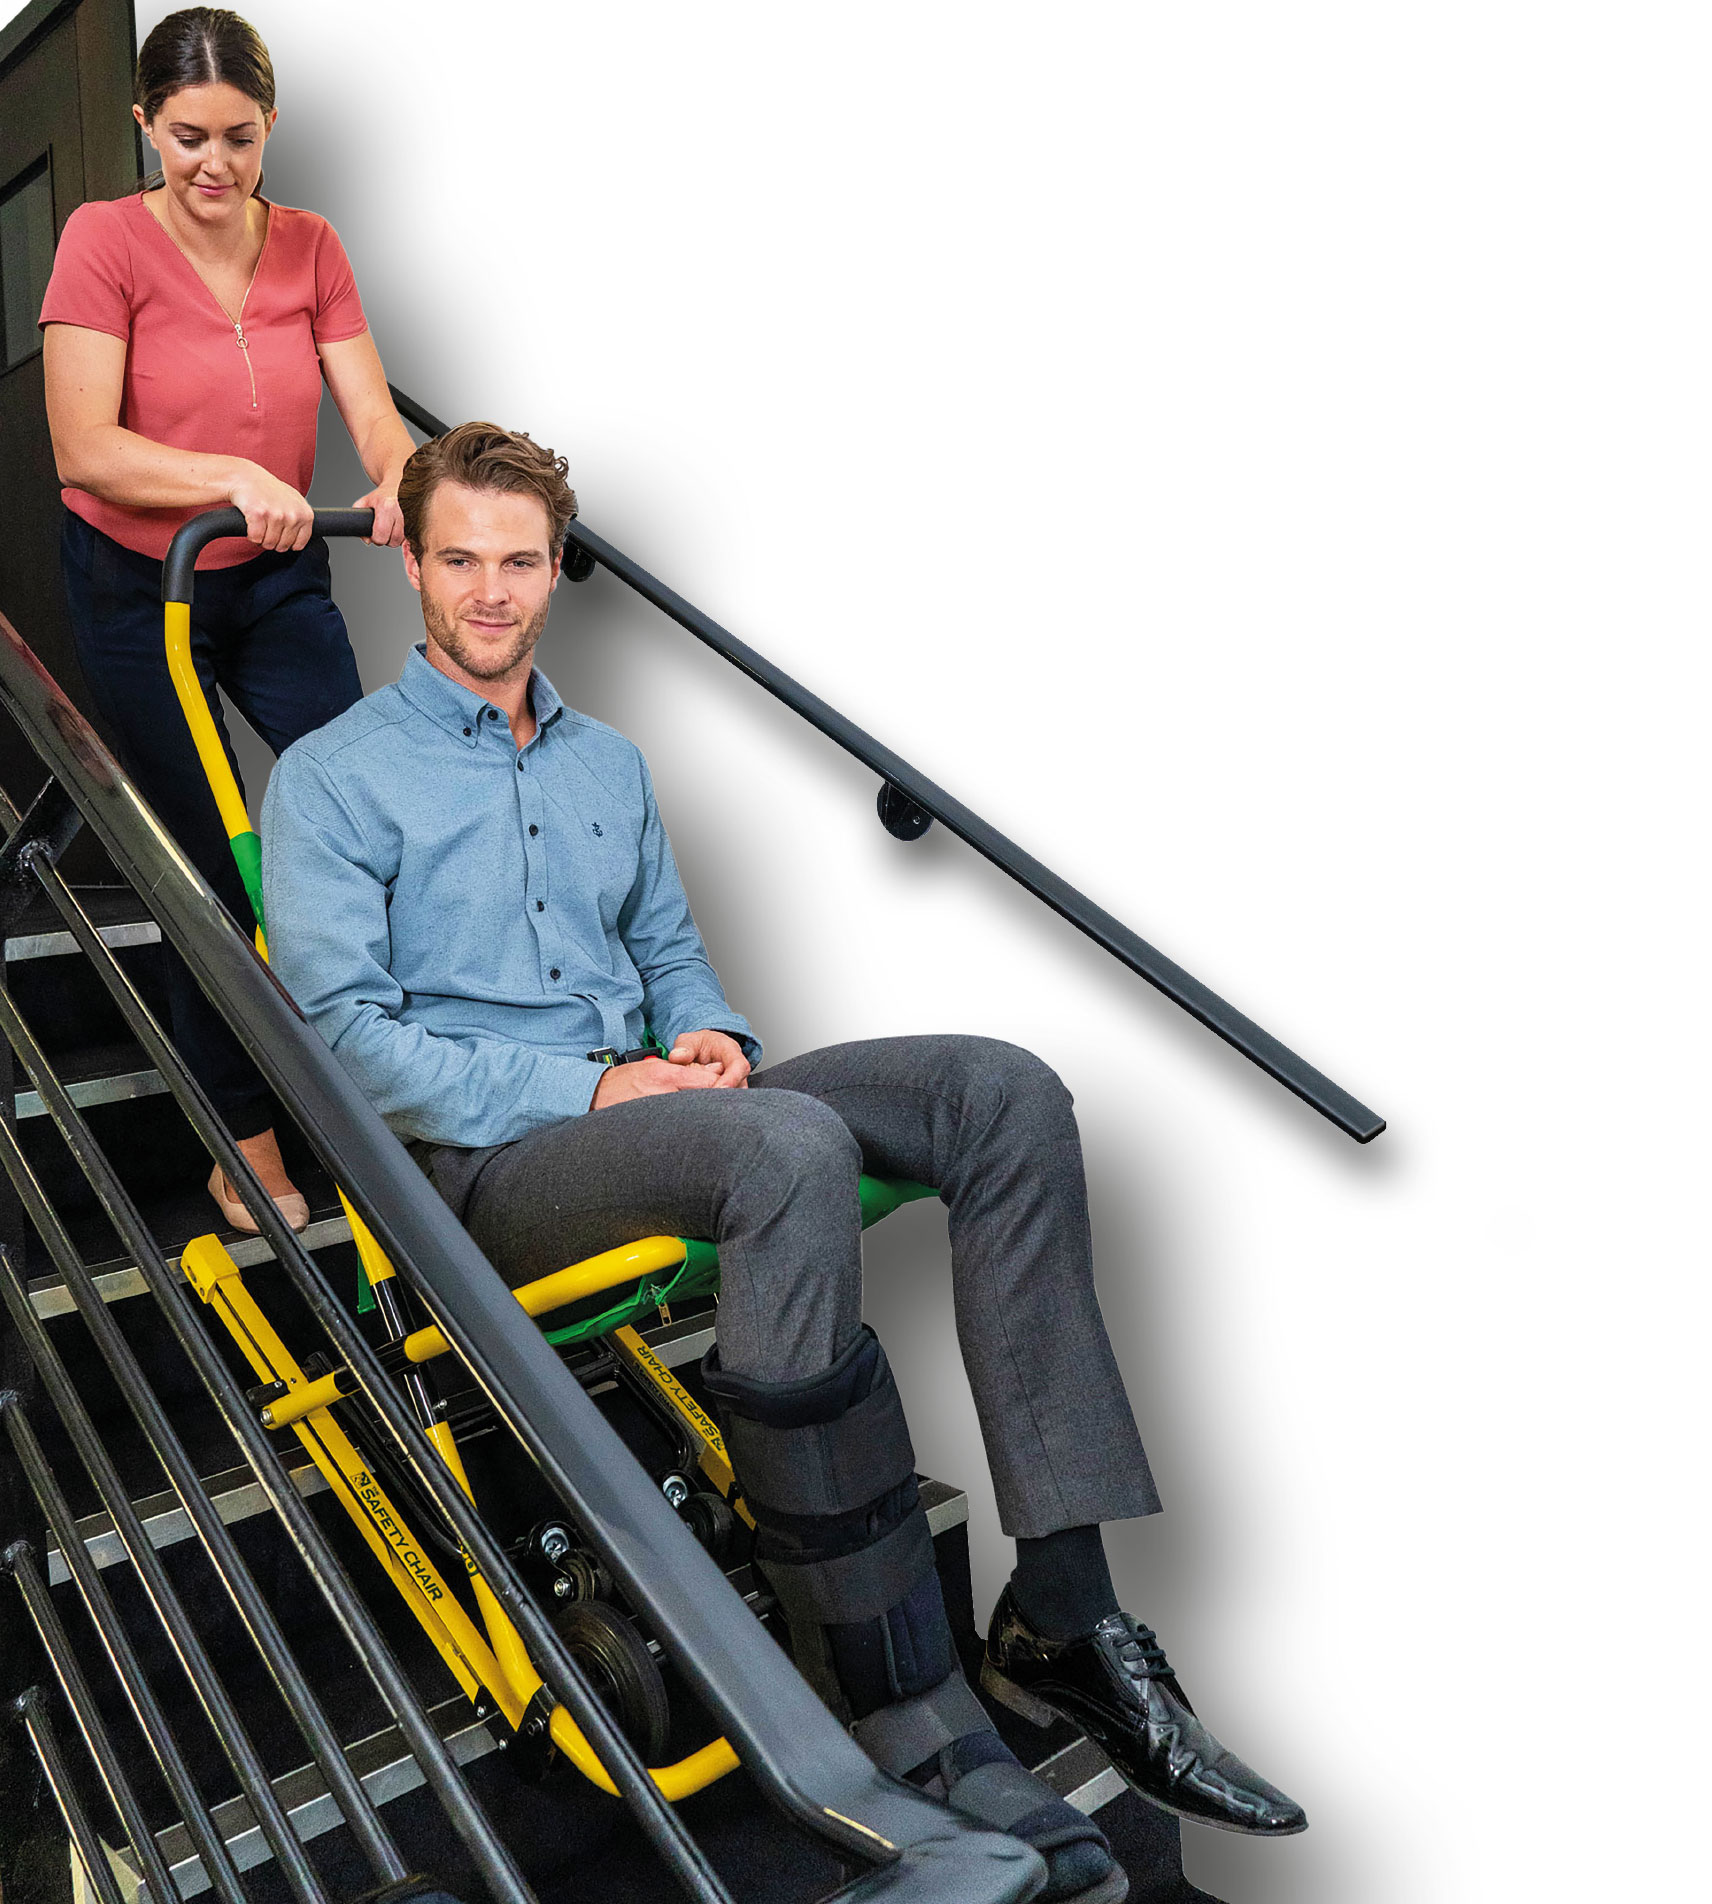 SC-4000-on-Stair-Main-Website-Image